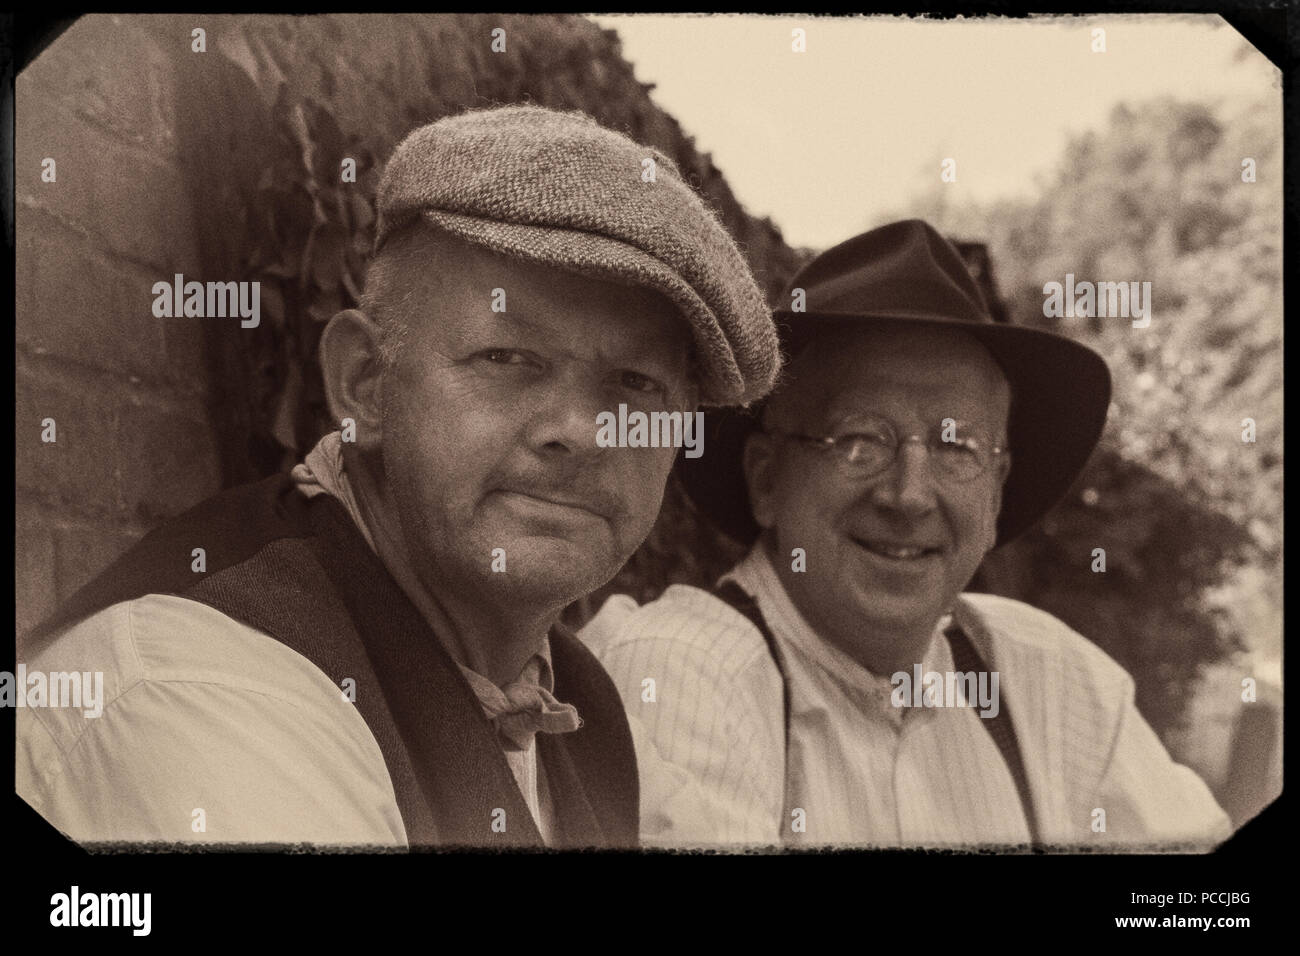 Monochrome, old-style photograph of male re-enactors, Black Country Living Museum UK, 1940's wartime event. 1940s men, vintage workers, wearing hats. Stock Photo